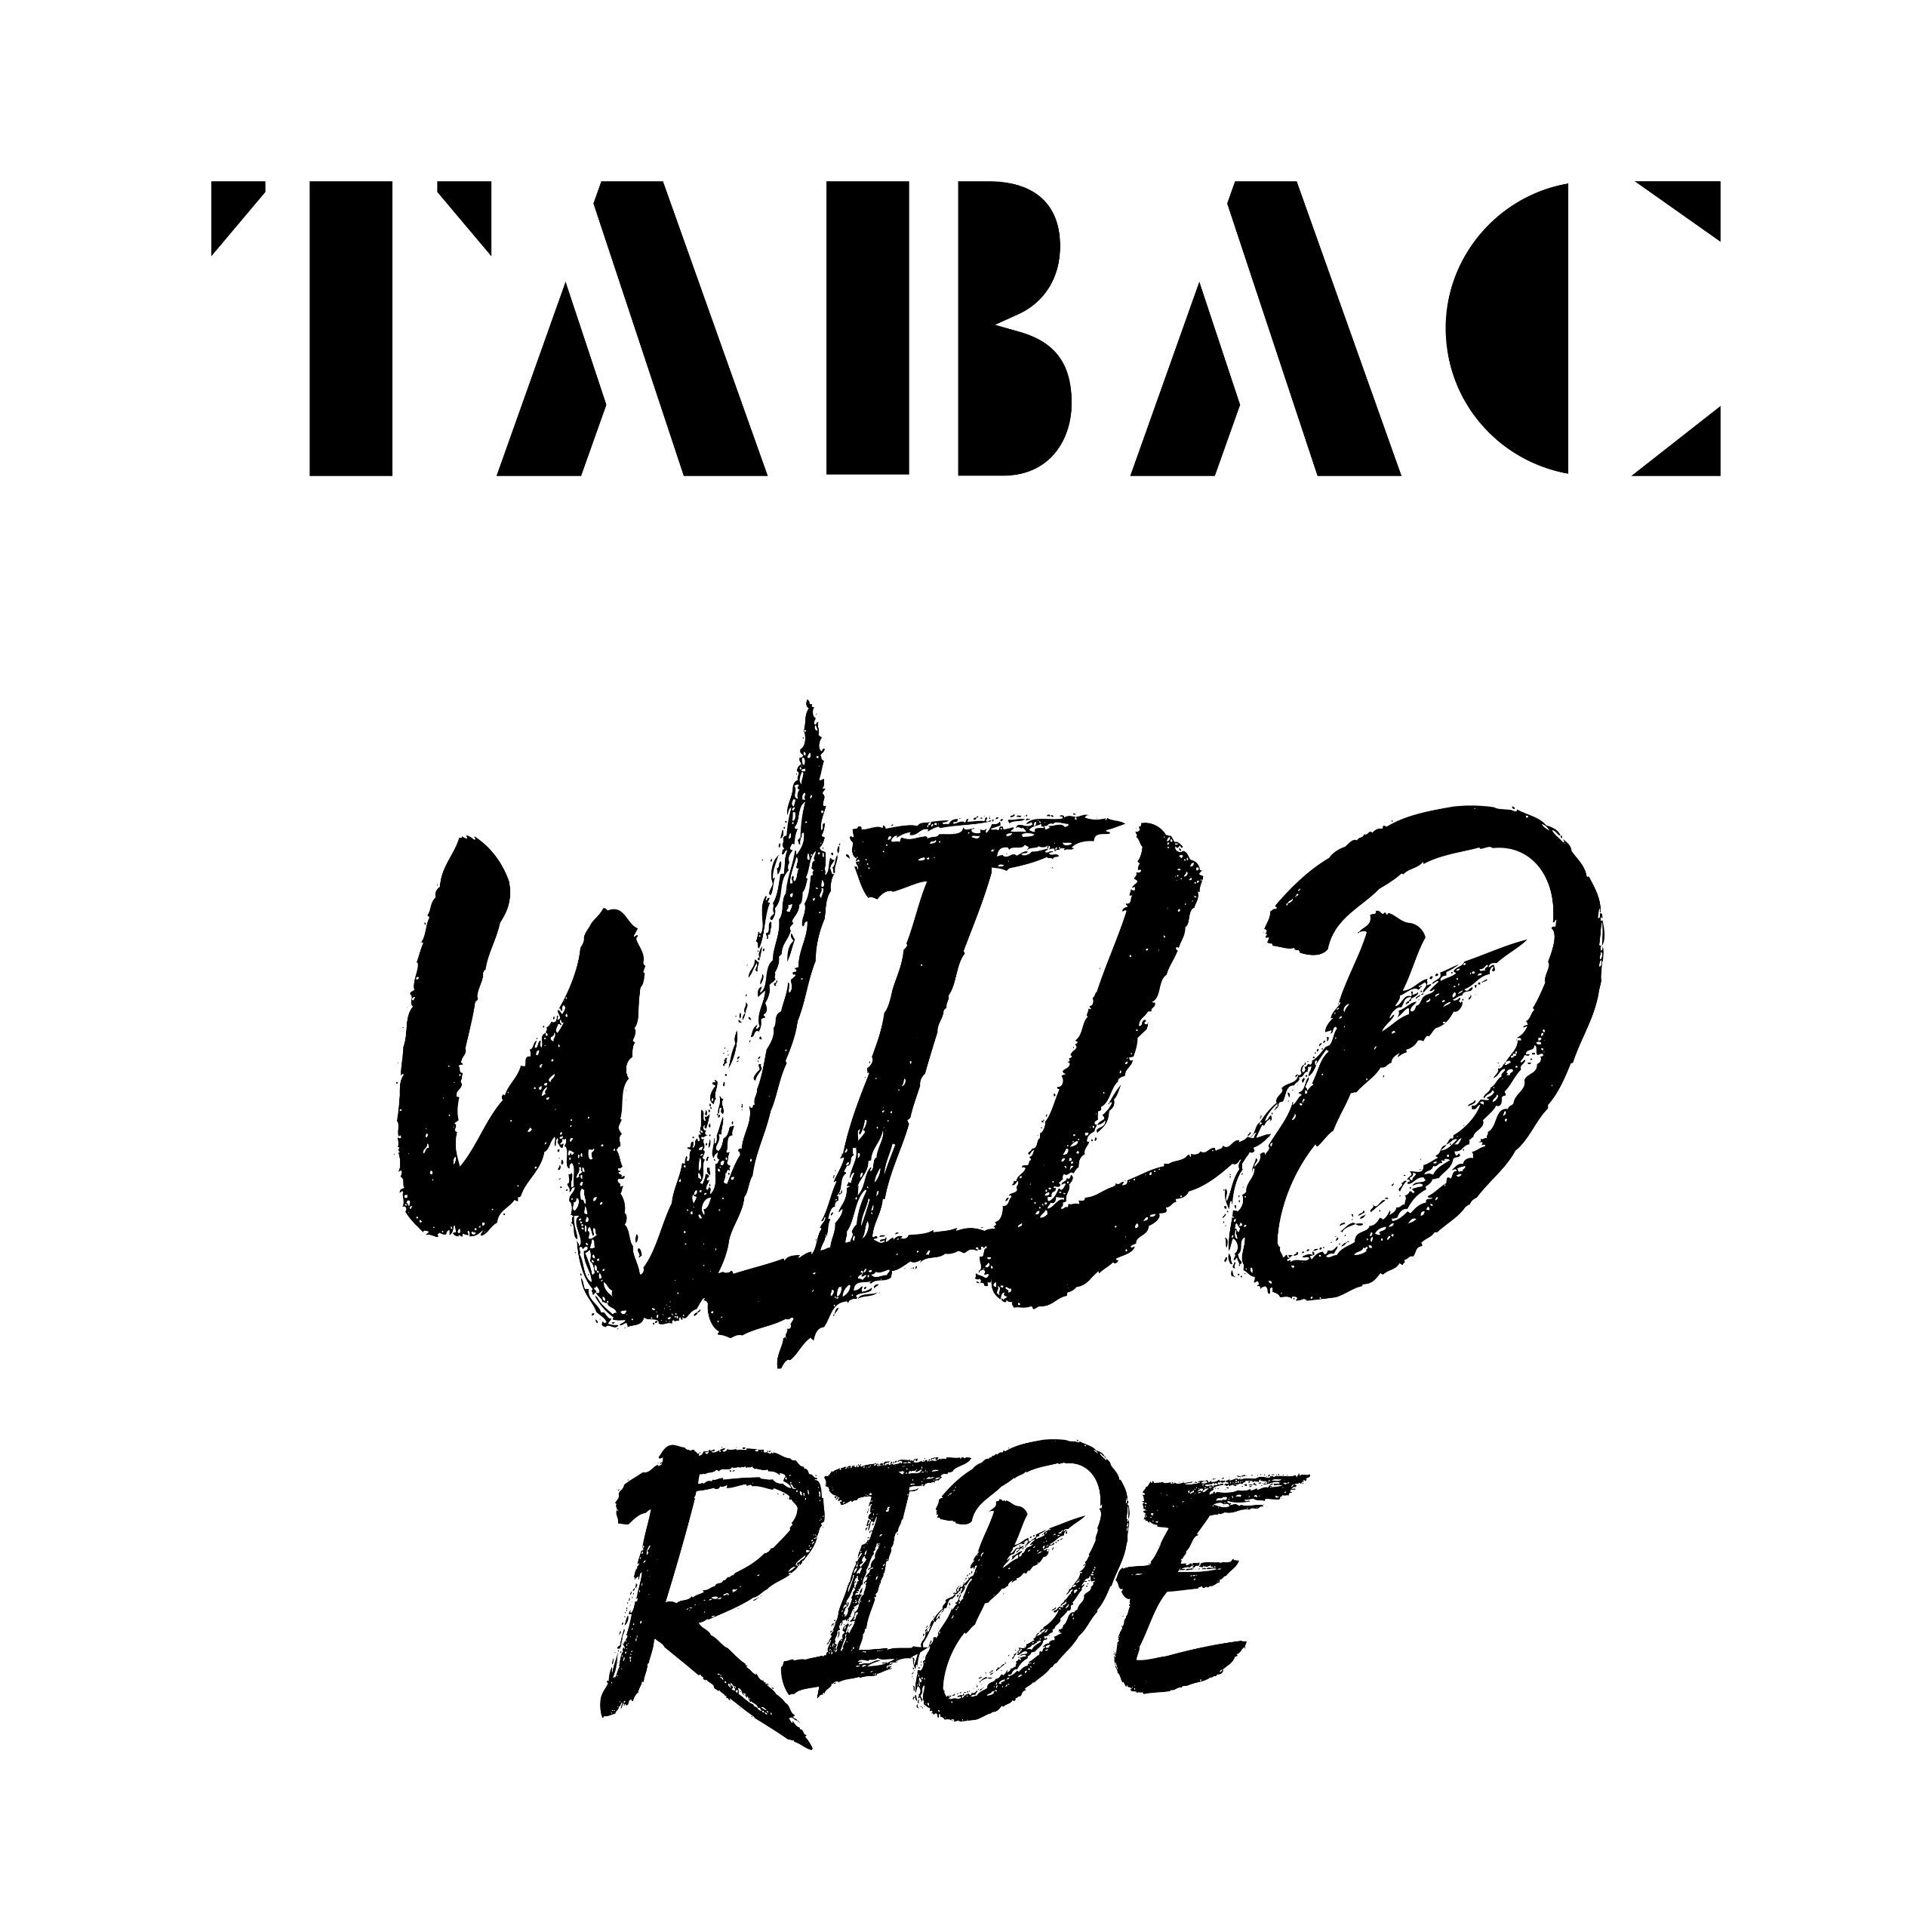 Wild After Ride 125 Shave Wild Lotion Tabac Gesichts-Reinigungslotion Ride ml Tabac